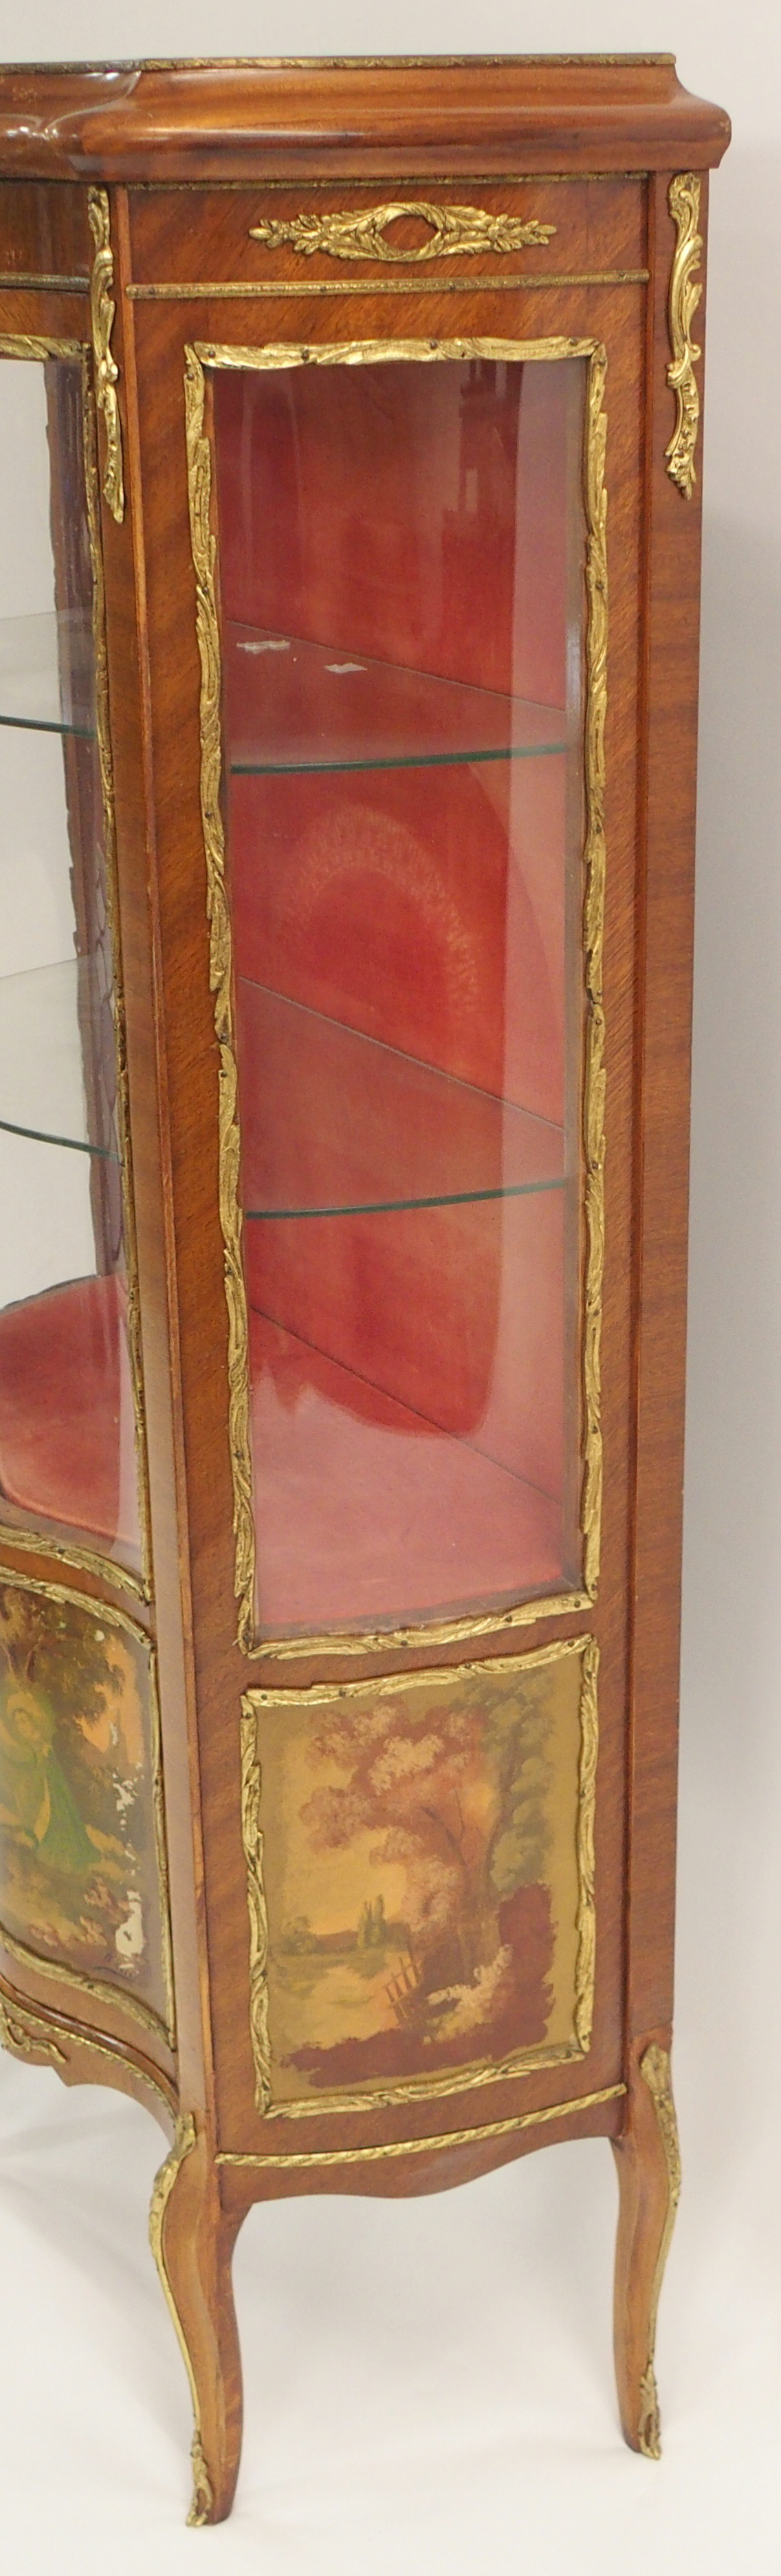 A VERNIS MARTIN STYLE FRUITWOOD DISPLAY CABINET the serpentine door and sides enclosing glass - Image 4 of 12